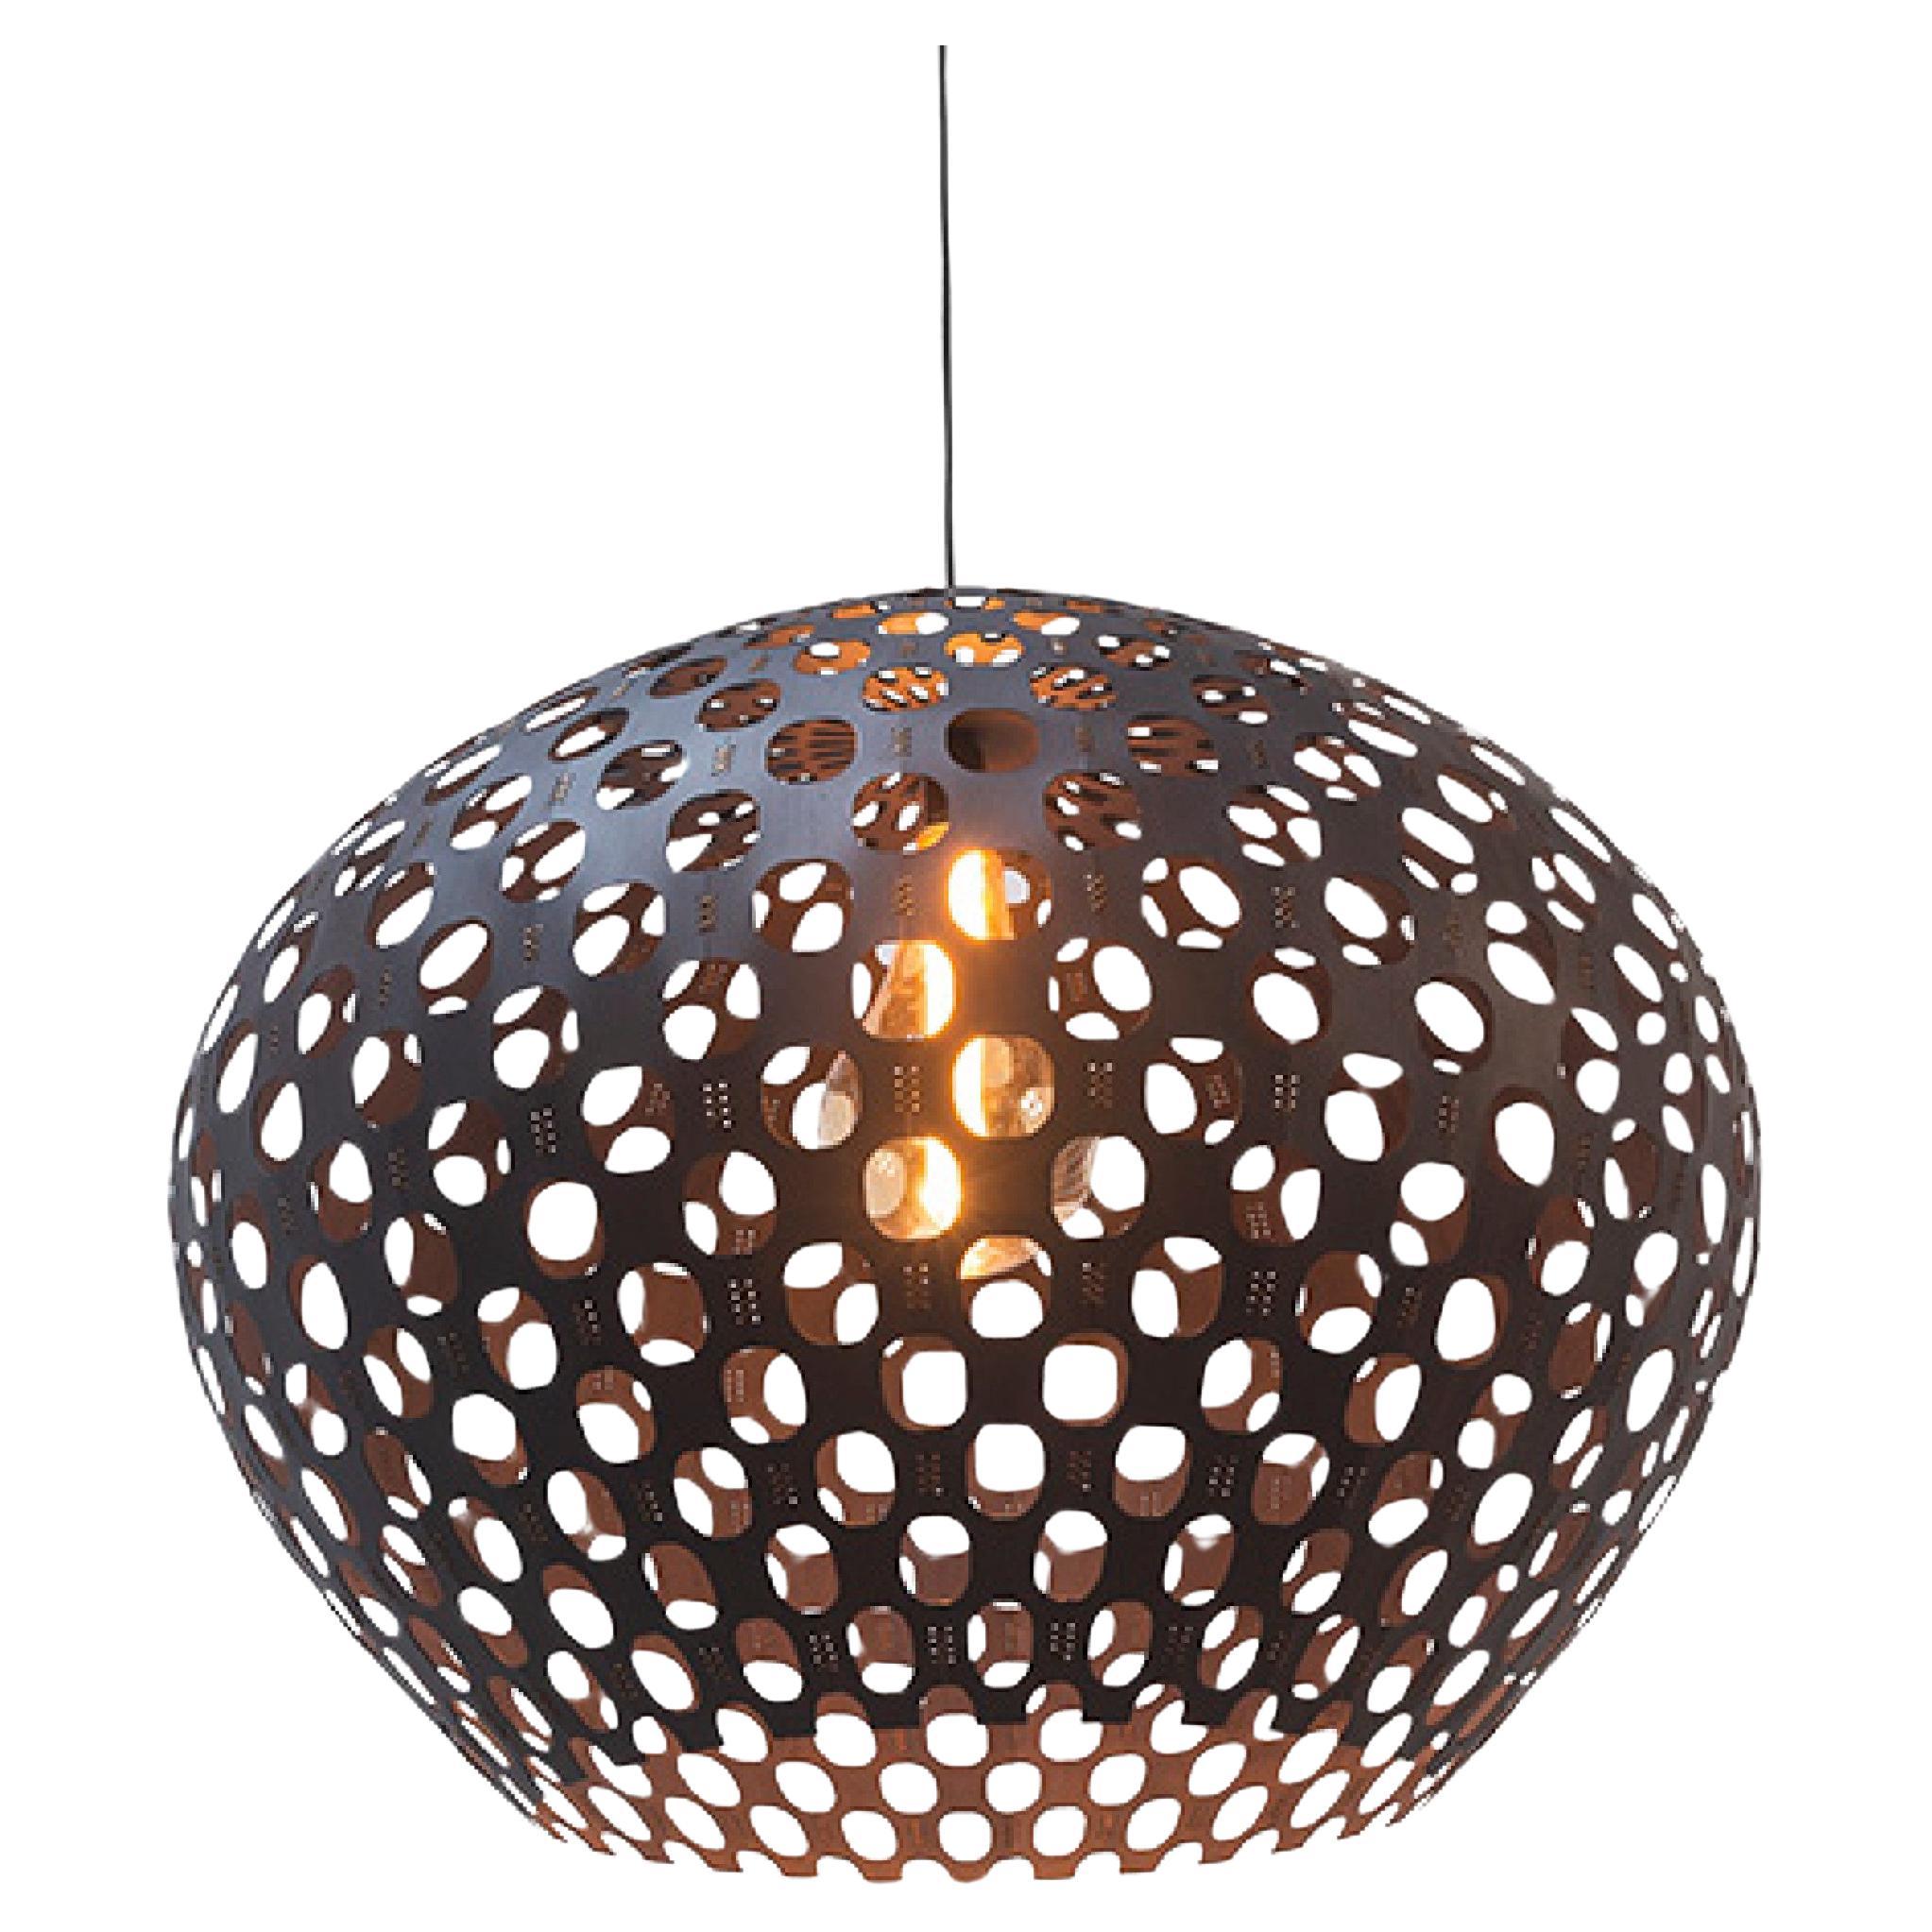 Panelitos Sphere Lamp Large by Piegatto, a Contemporary Sculptural Lamp For Sale